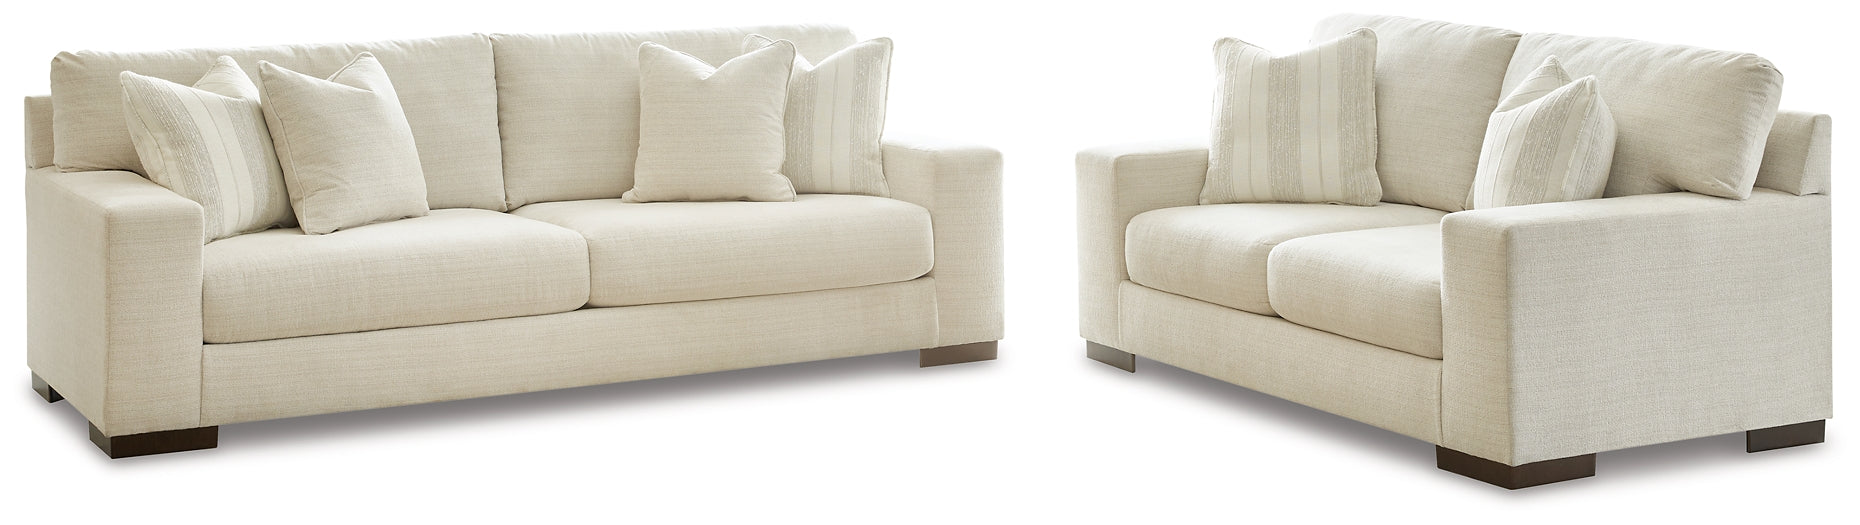 Maggie Sofa and Loveseat JB's Furniture  Home Furniture, Home Decor, Furniture Store